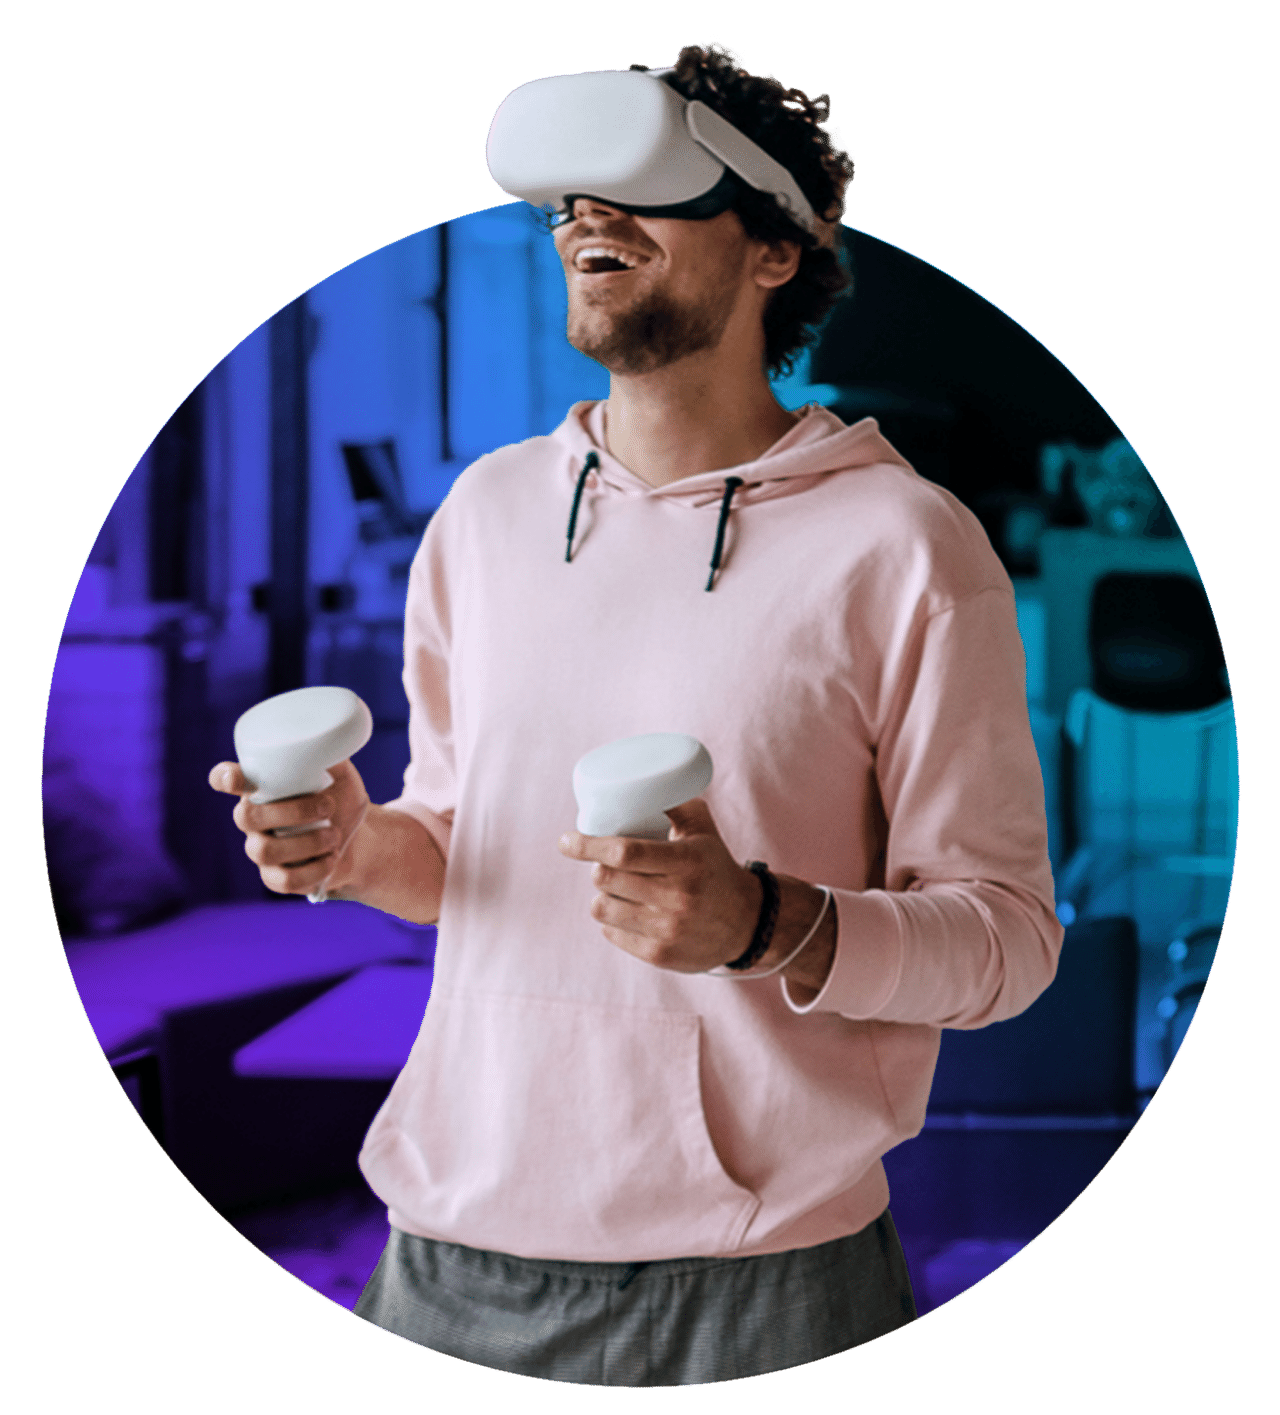 Gaming & extended reality expert wearing VR headset